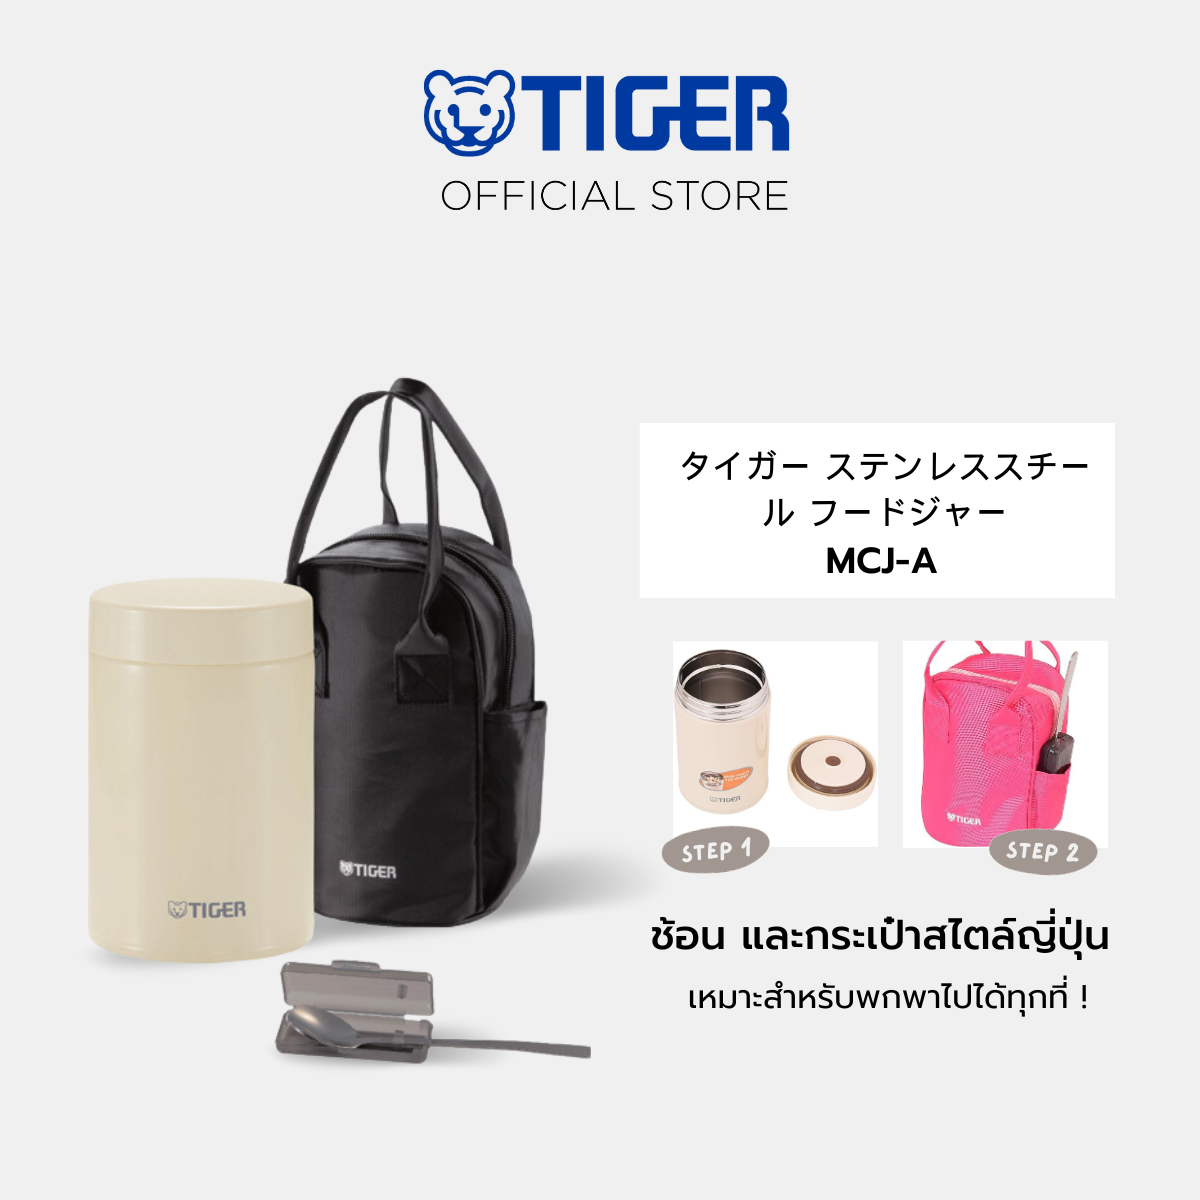 Tiger Corporation LWR-A072 Thermal Lunch Box, Champagne Gold